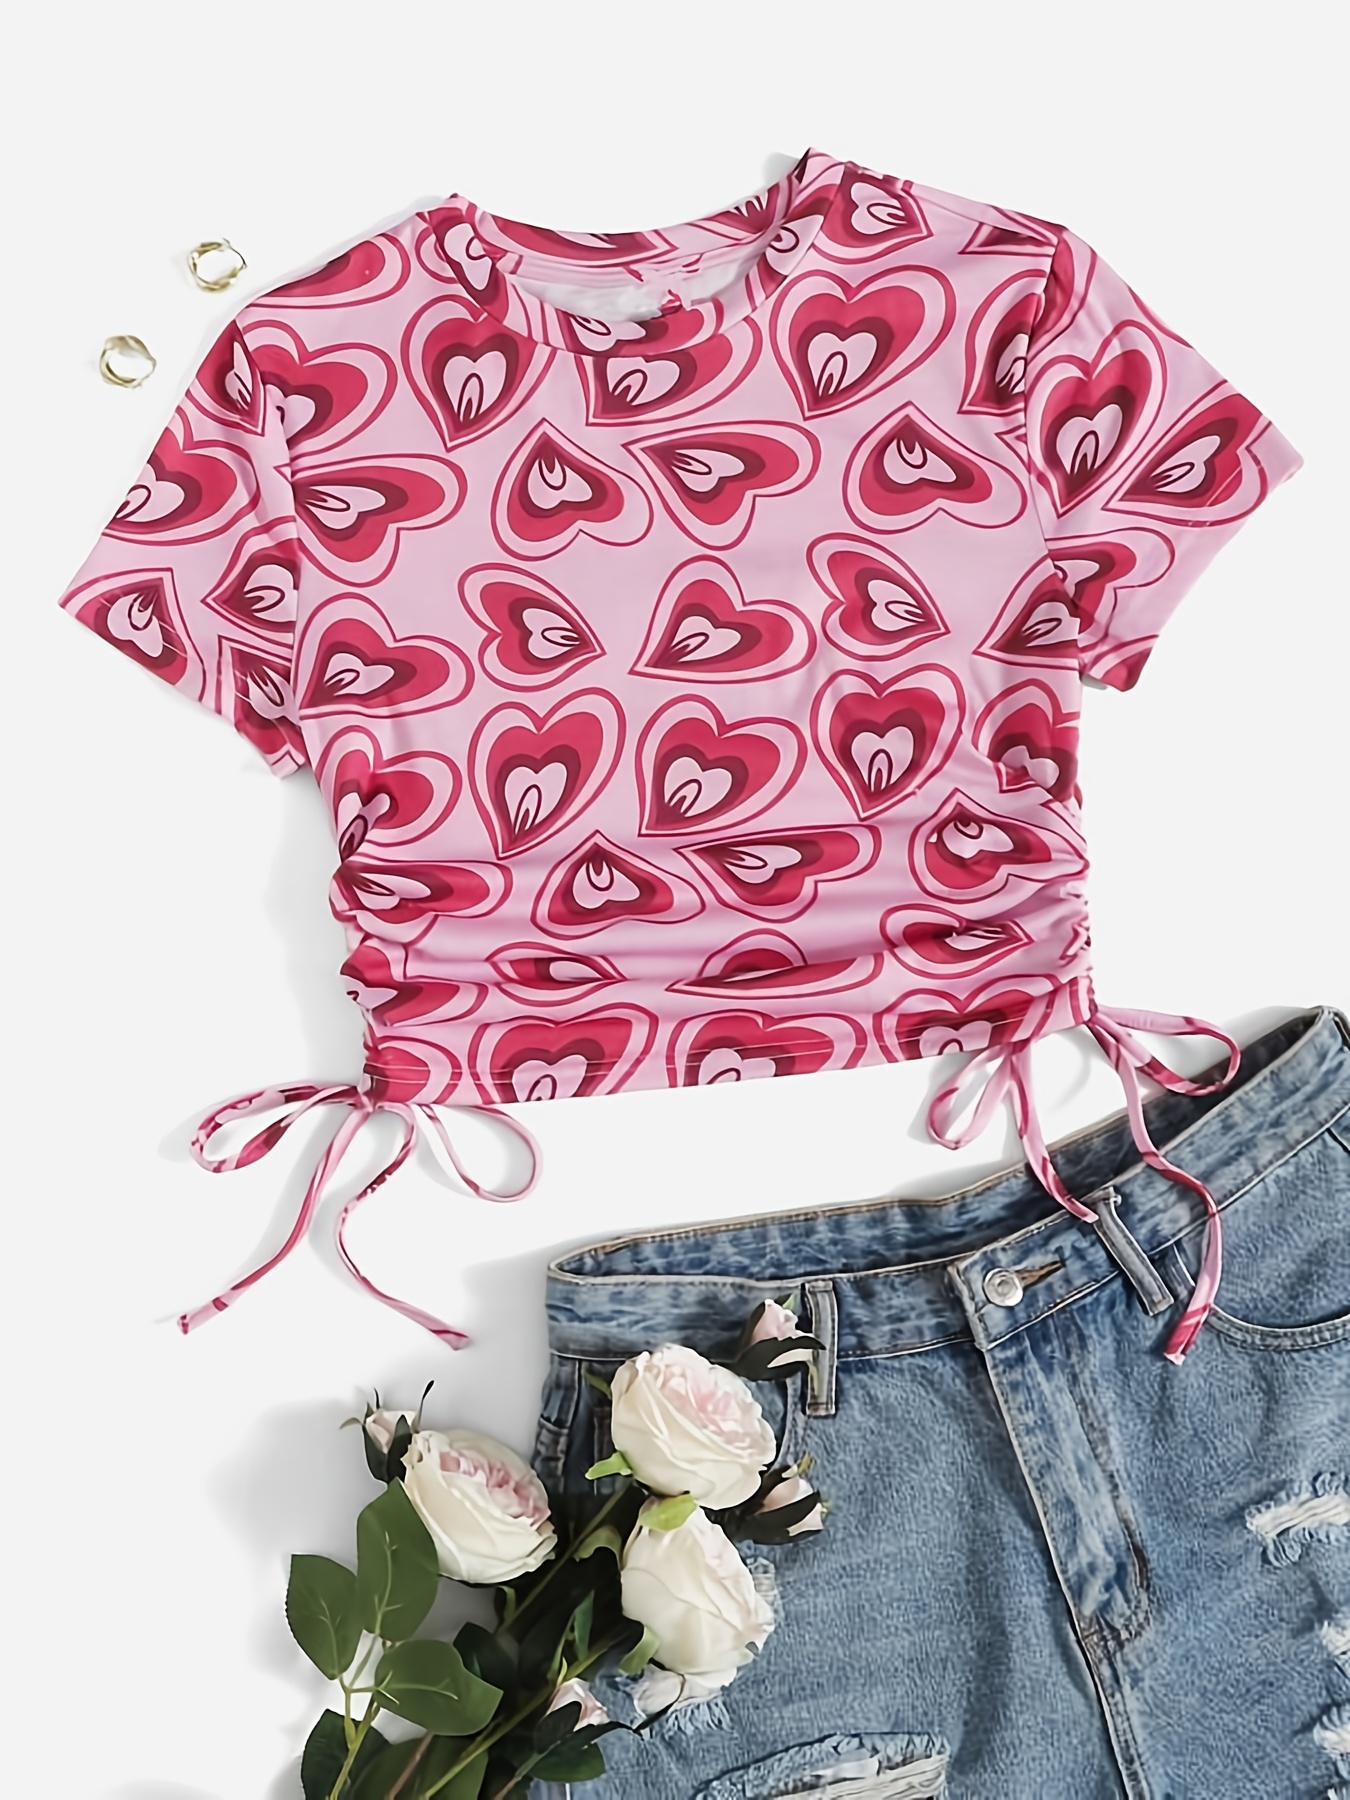 Womens Short Sleeve Tops Breathable Trendy Heart Print Crop Top Sexy BM  Style Tight T-shirt for Valentines Day 